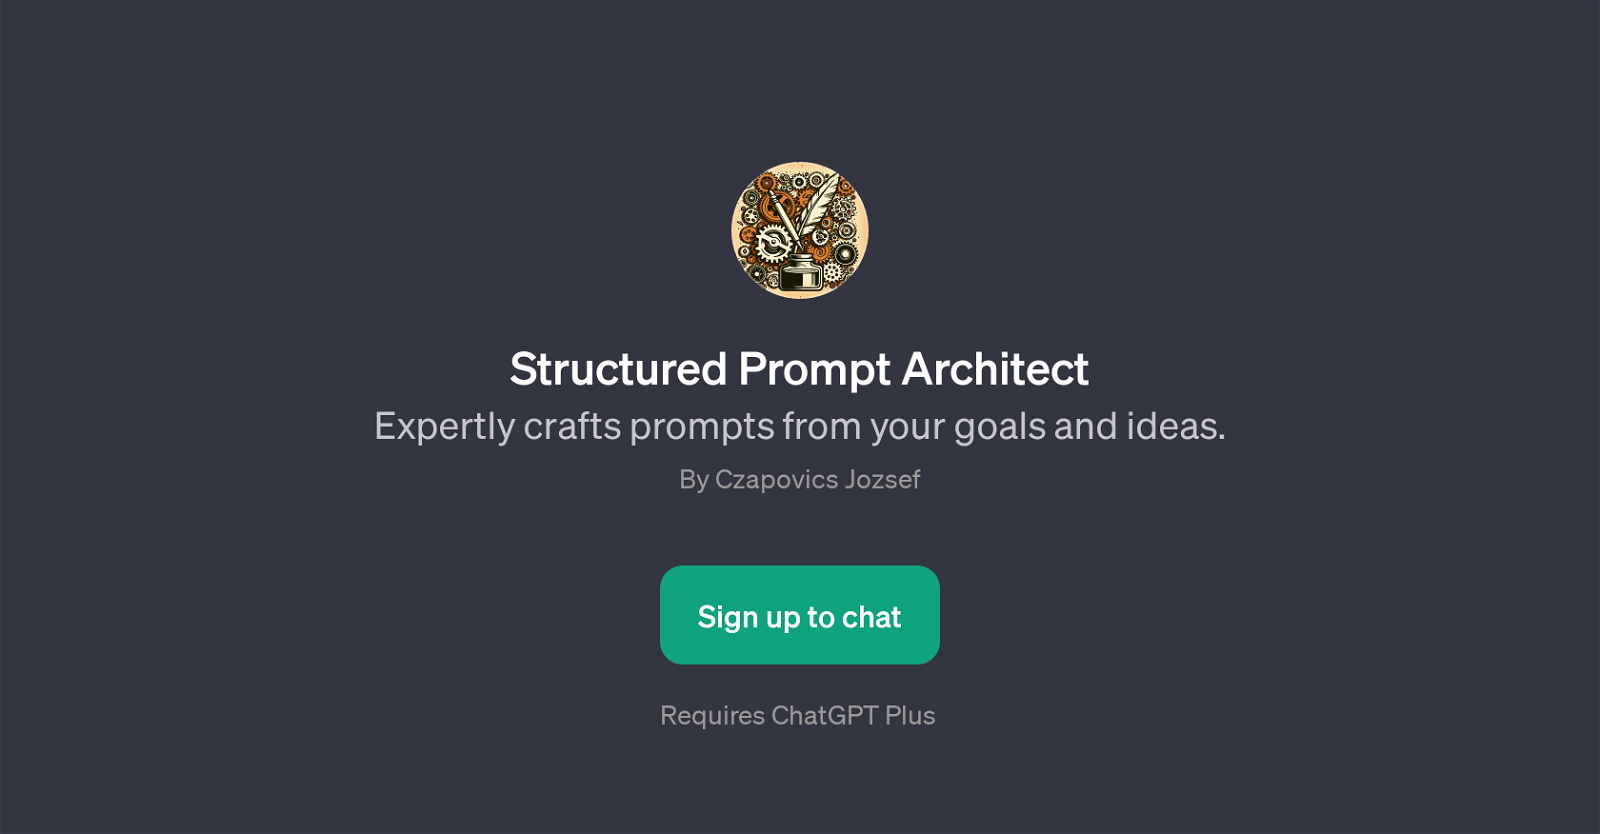 Structured Prompt Architect website